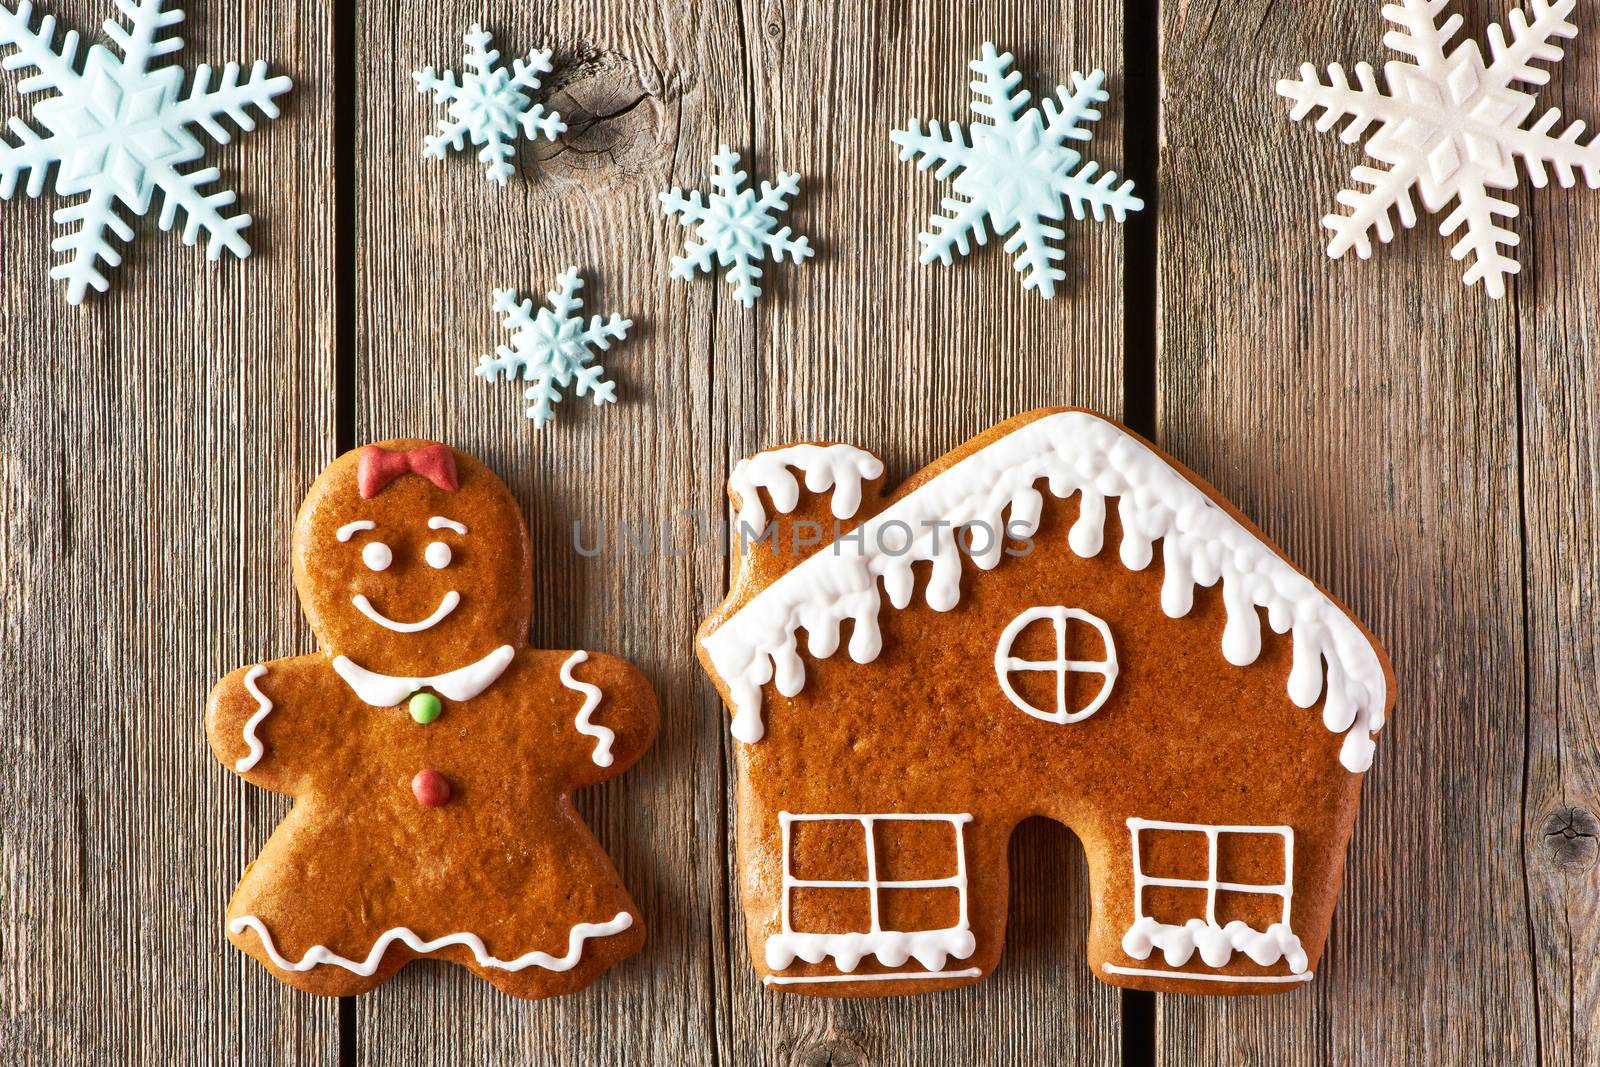 Christmas homemade gingerbread girl and house on wooden table